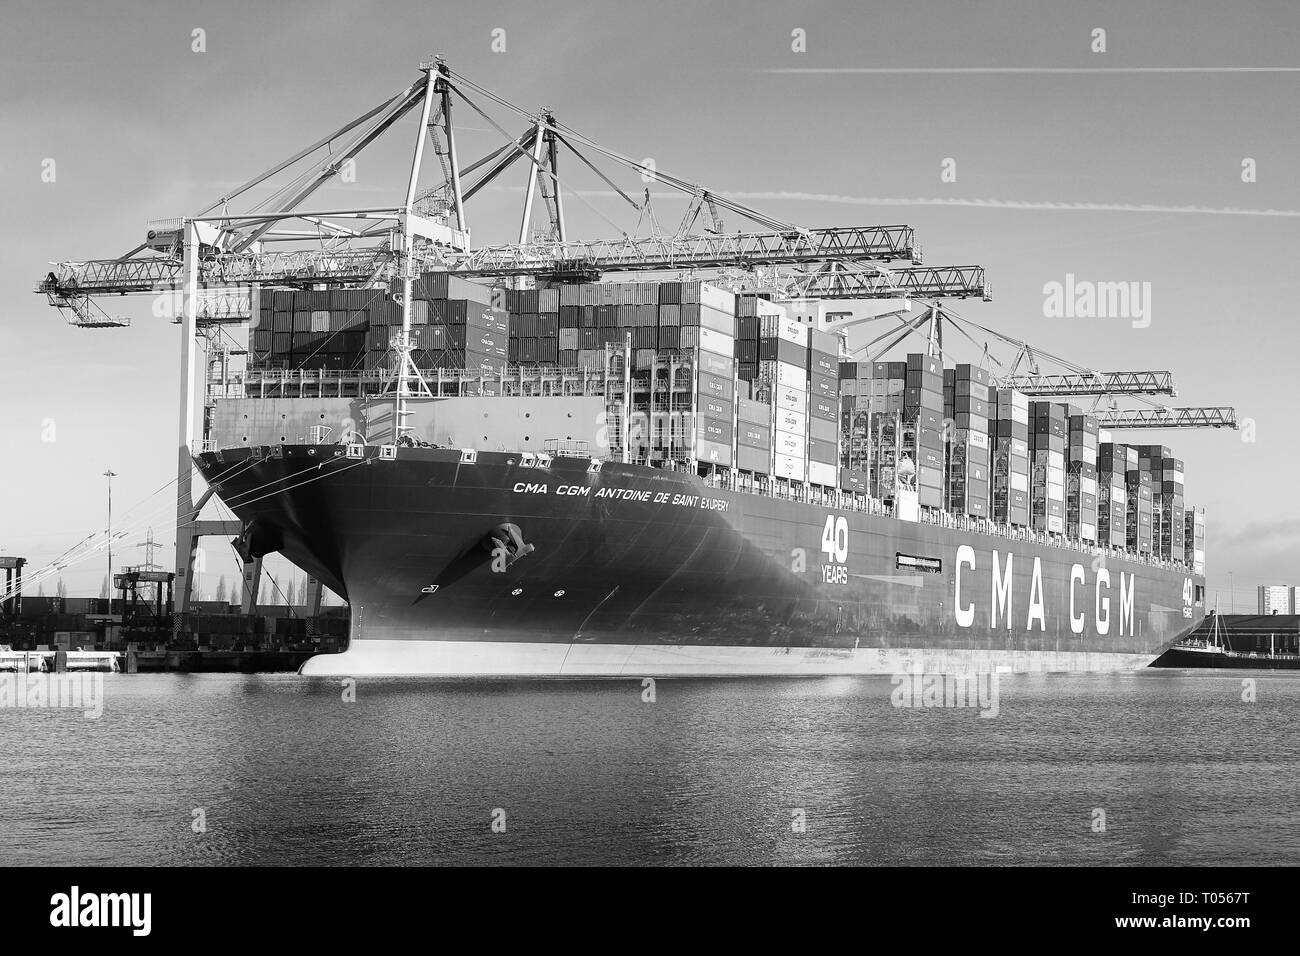 Black & White Photo Of The Ultra-Large Container Ship, CMA CGM Antoine de Saint Exupery, Loading And Unloading In The Southampton Container Terminal. Stock Photo